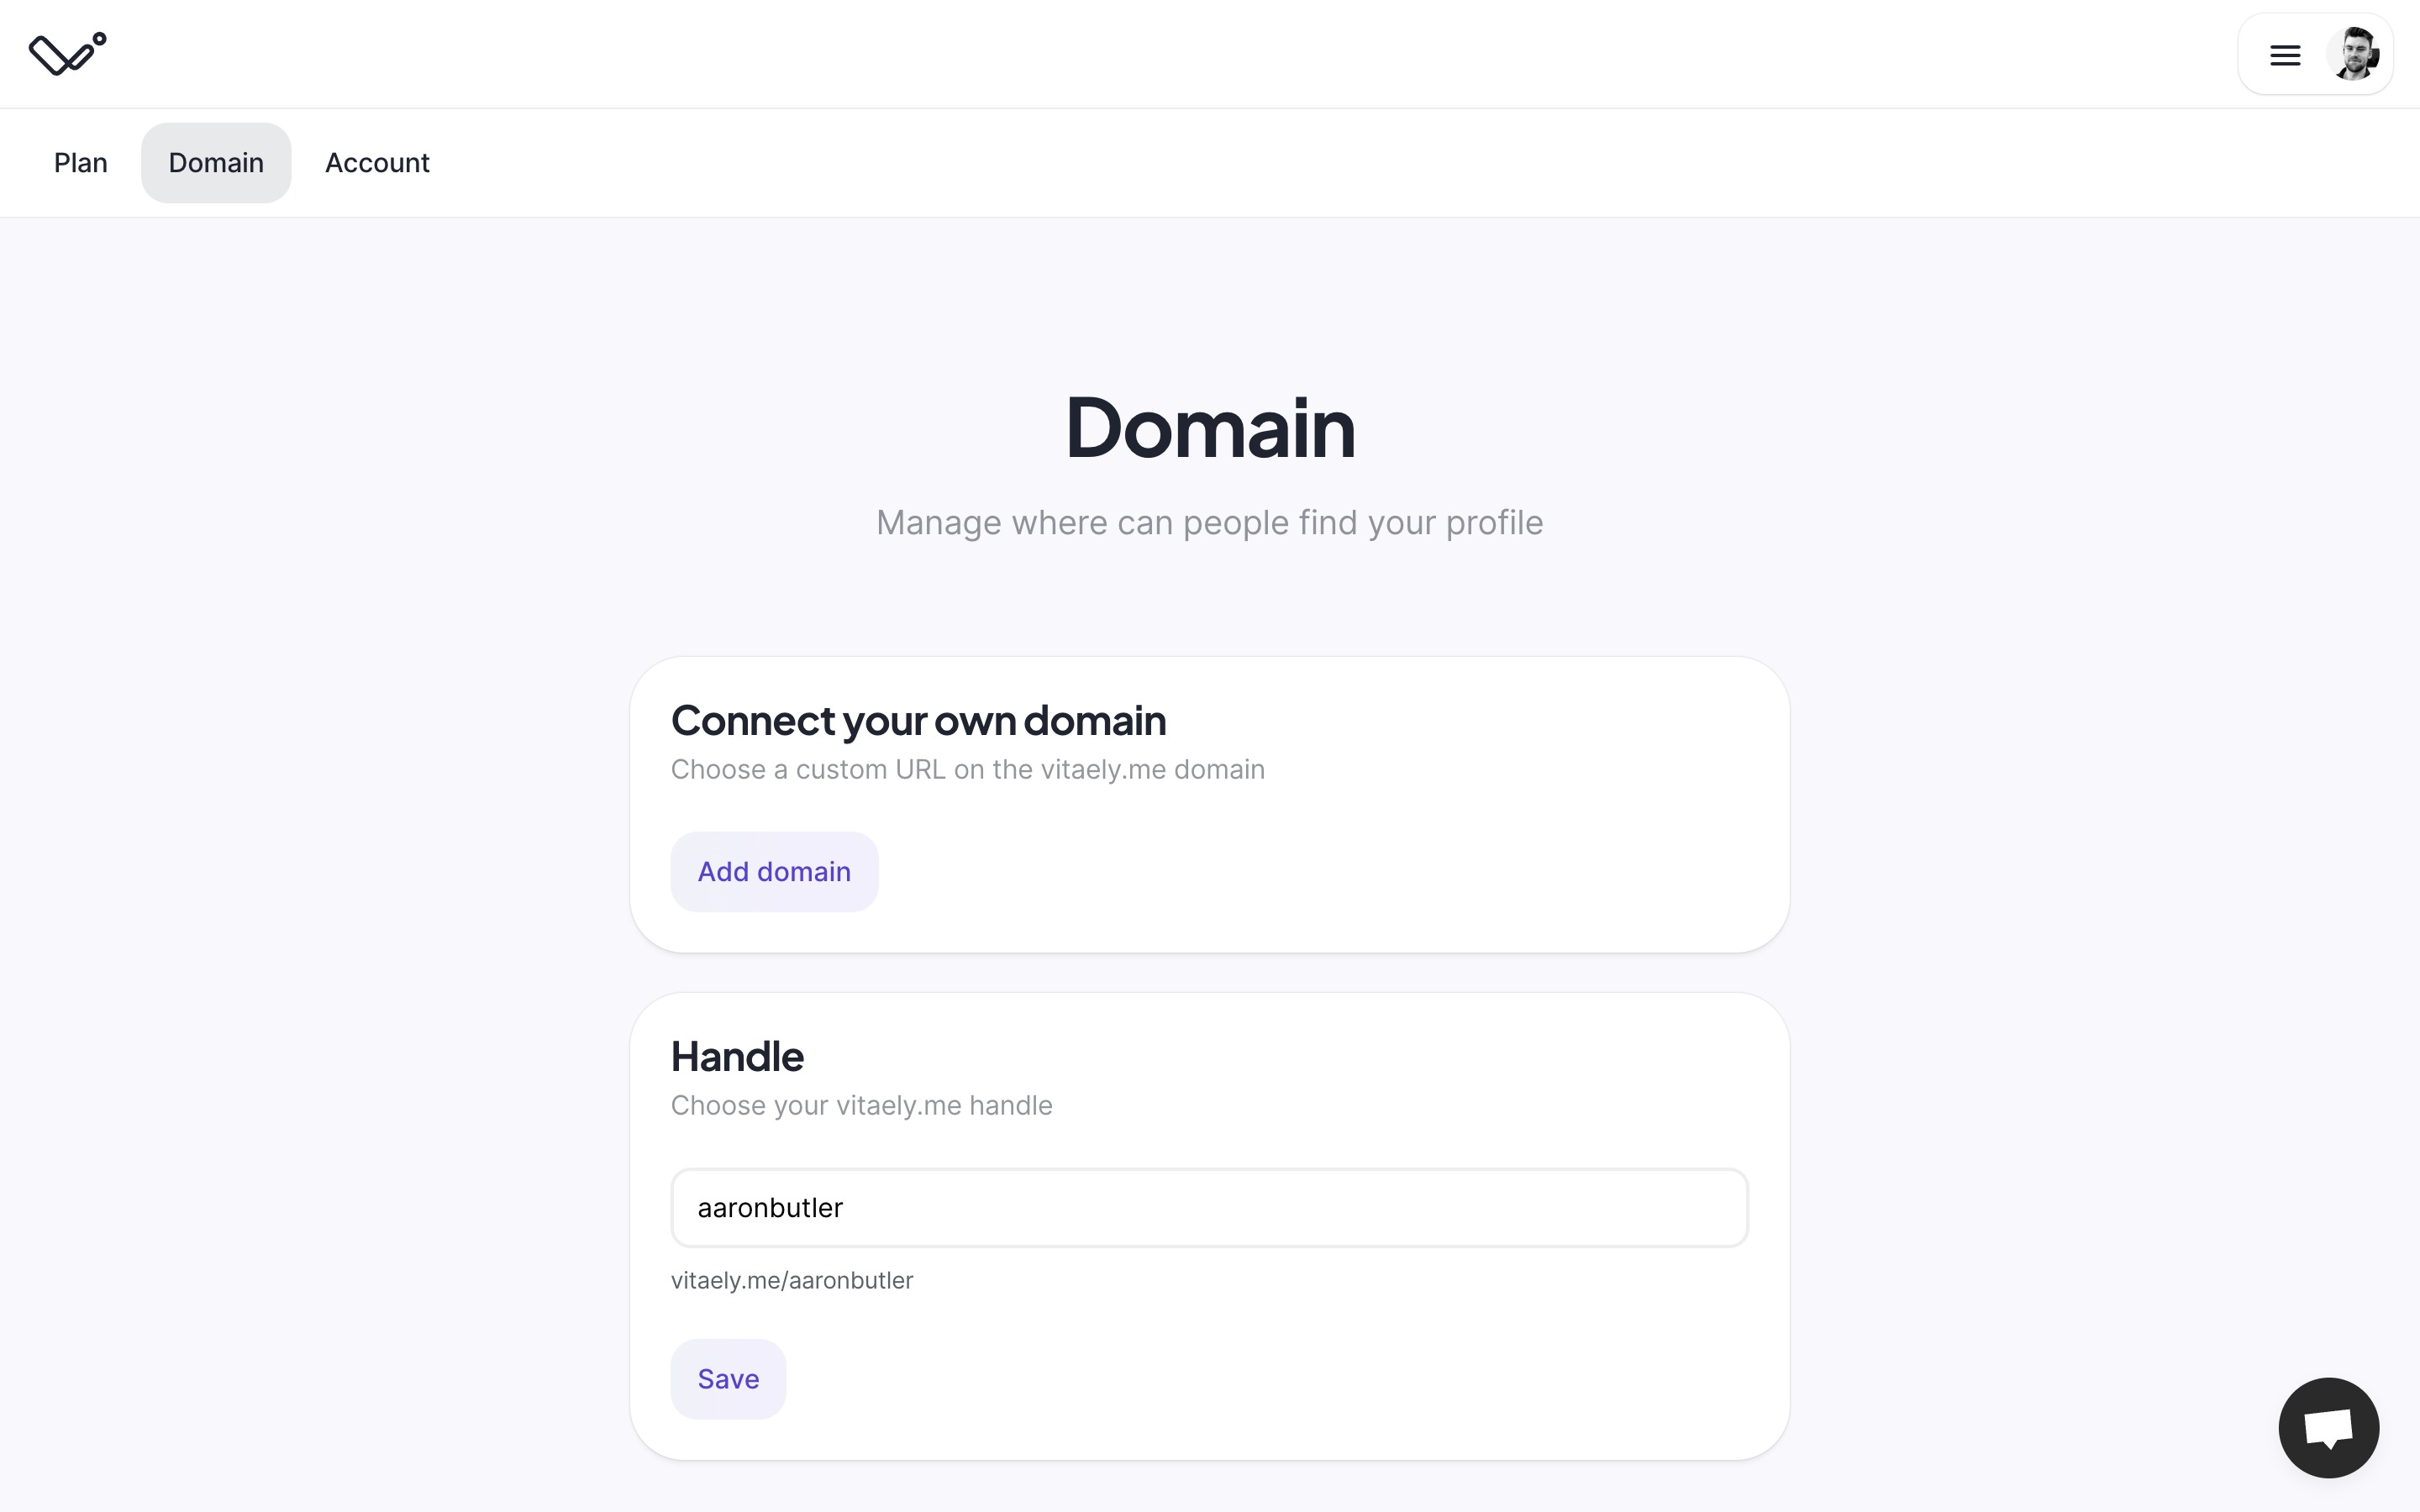 Access the domain settings page of your profile